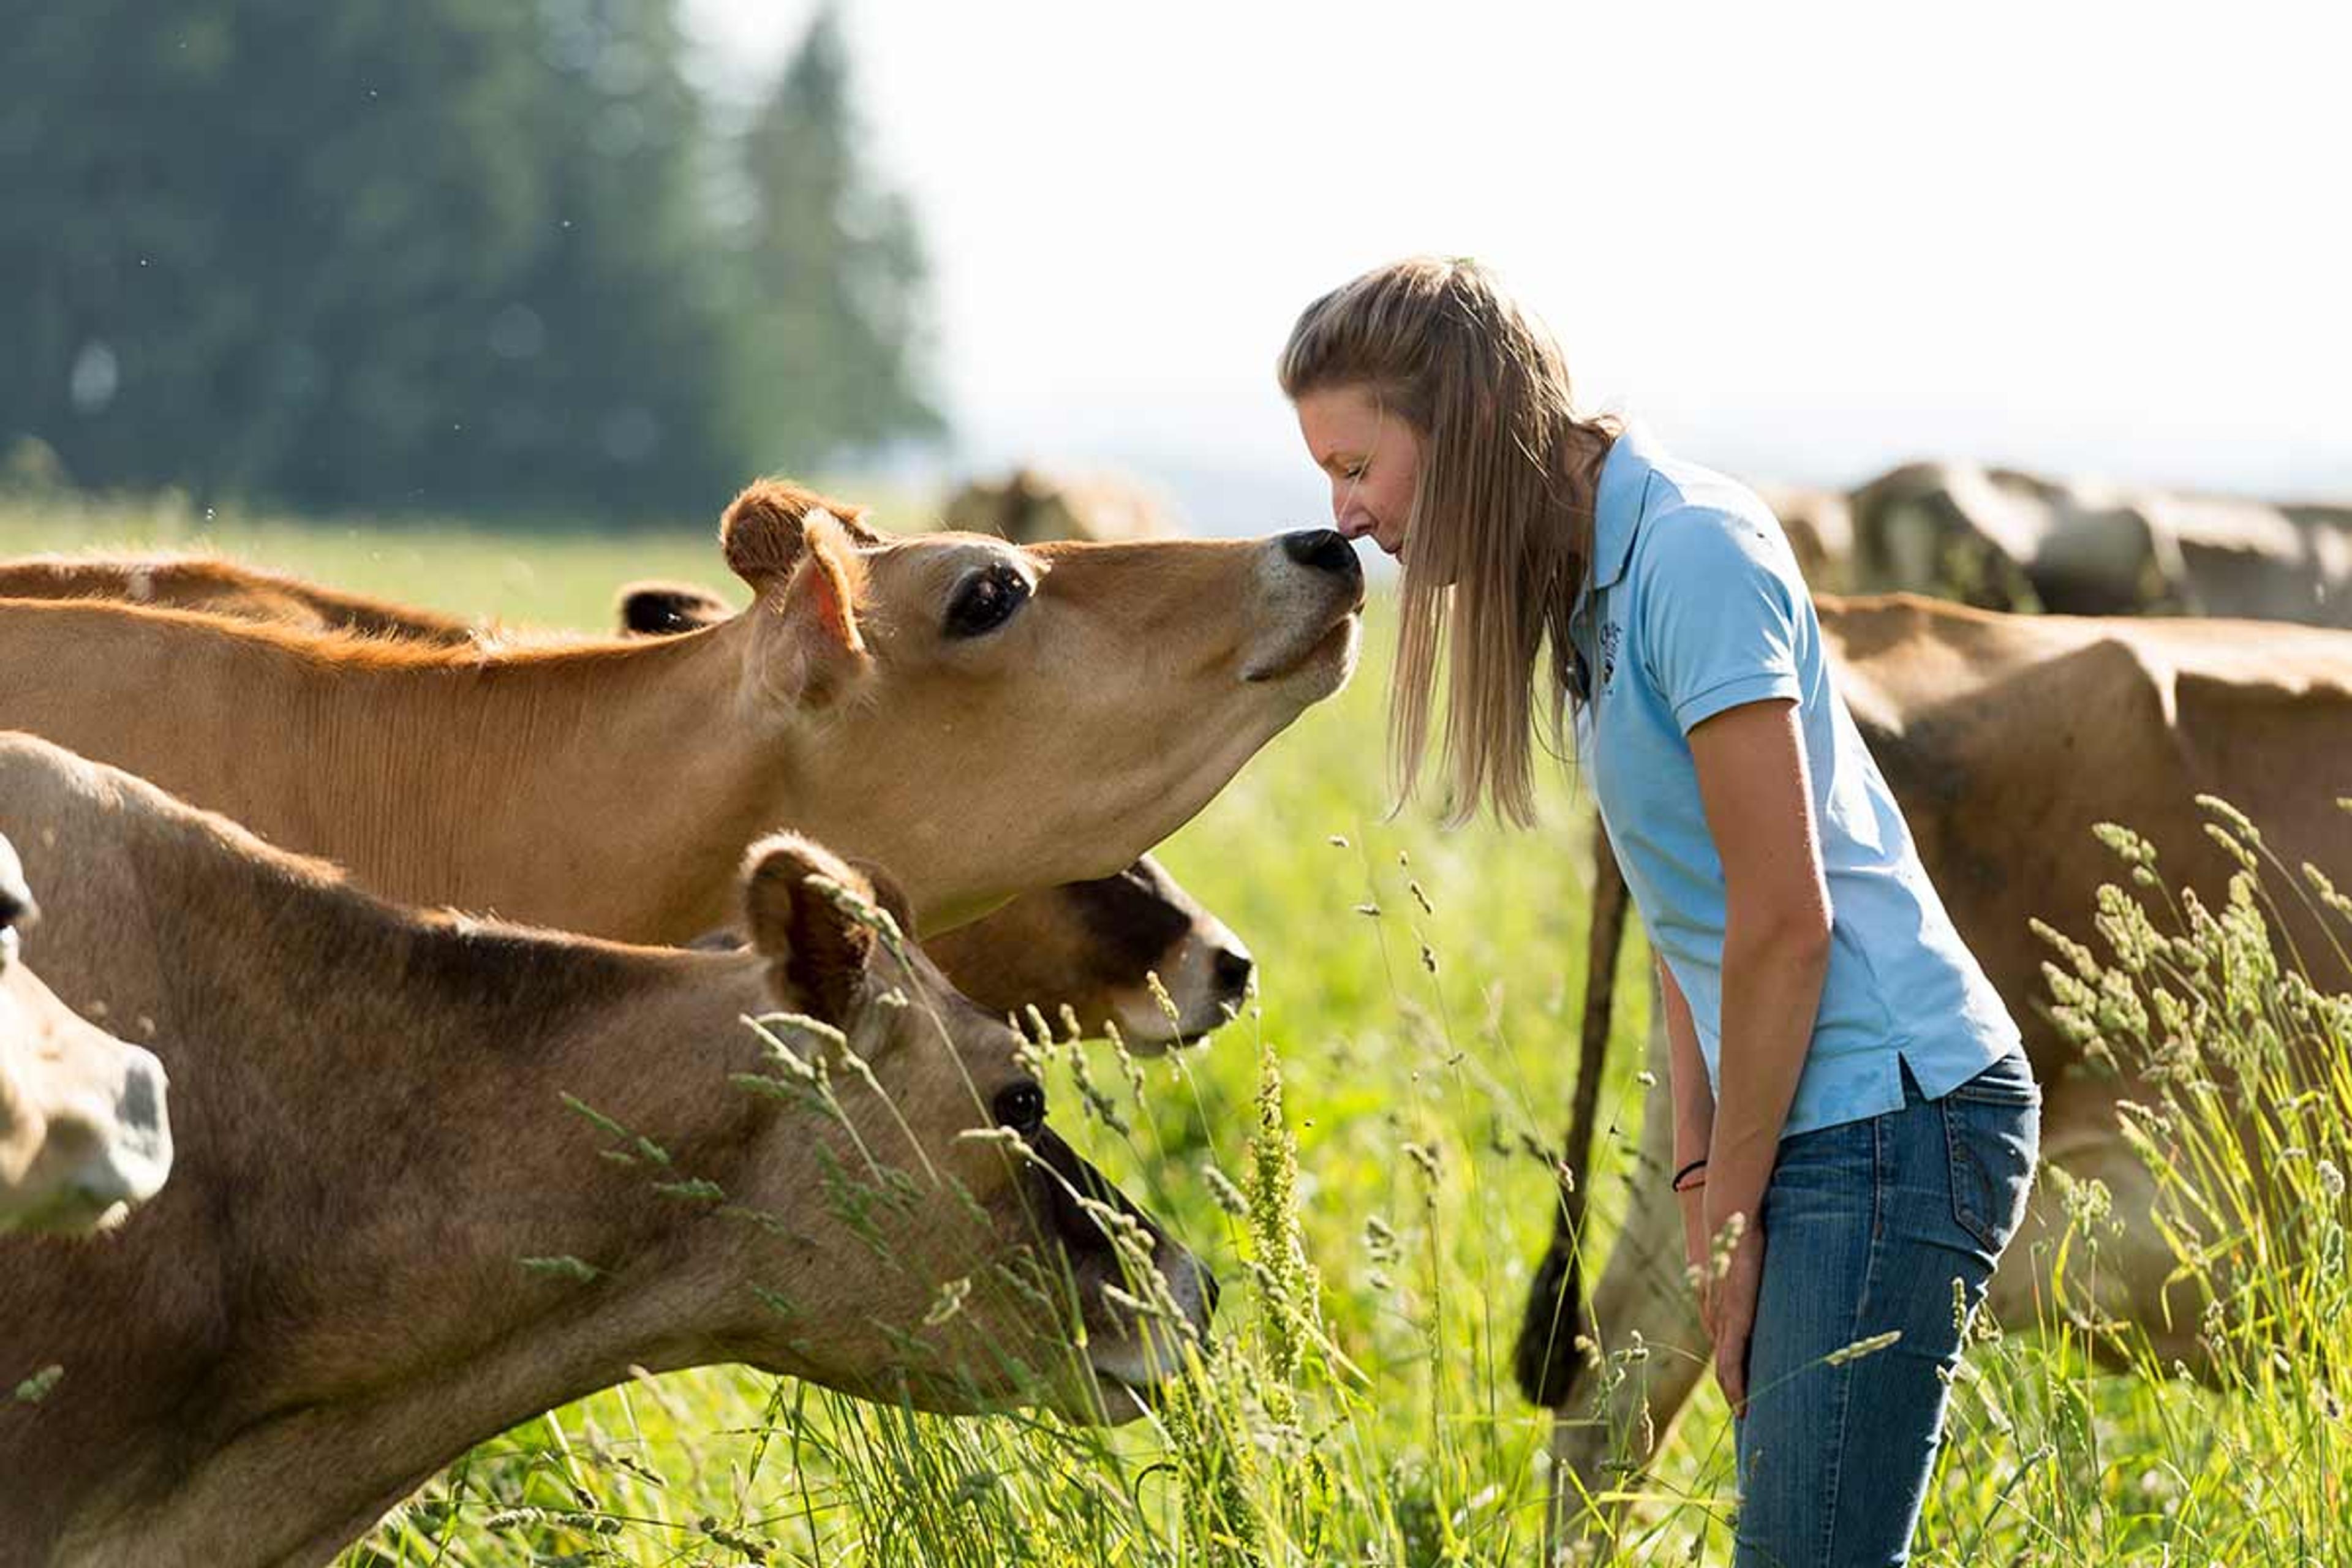 A young woman and a friendly Jersey cow touch noses in a sweet moment outside in tall pasture grasses.